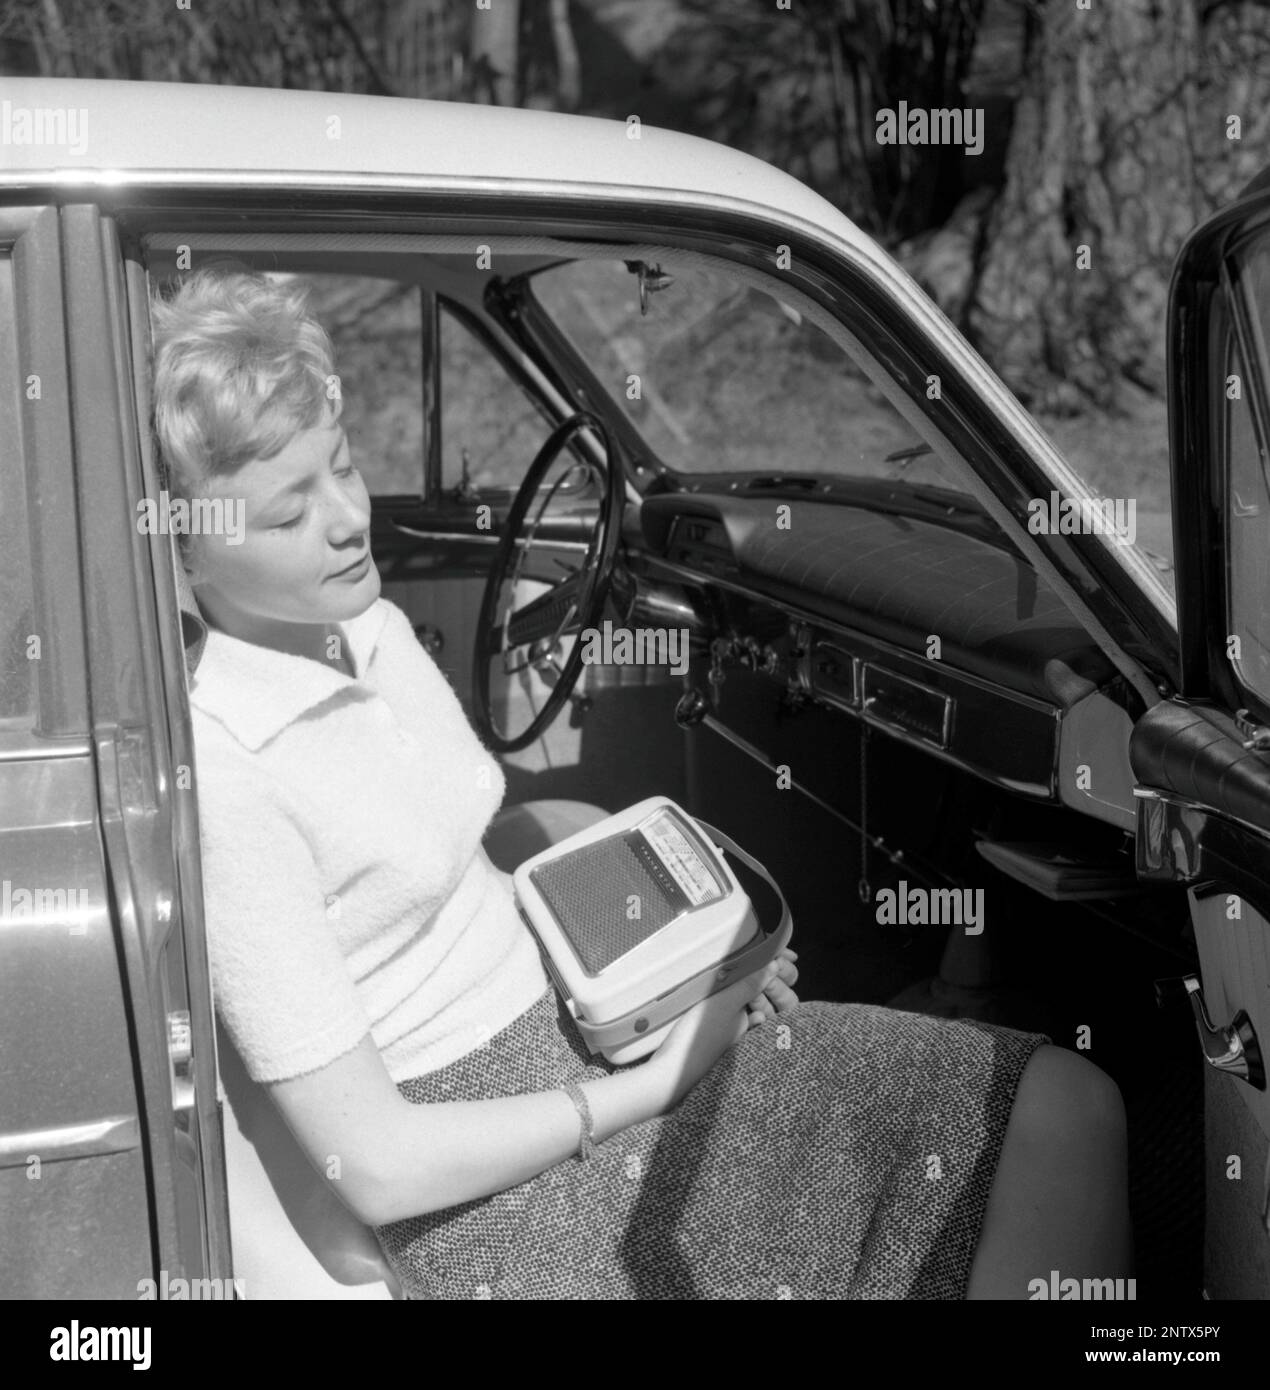 In the 1960s. A young woman in a car listening to a portable radio. Battery operated transistor radio with AM and FM bands. The radiostations and frequenses are displayed on the front, and a knob to turn and adjust to get best possible reception. Sweden 1960 Conard ref 4220 Stock Photo